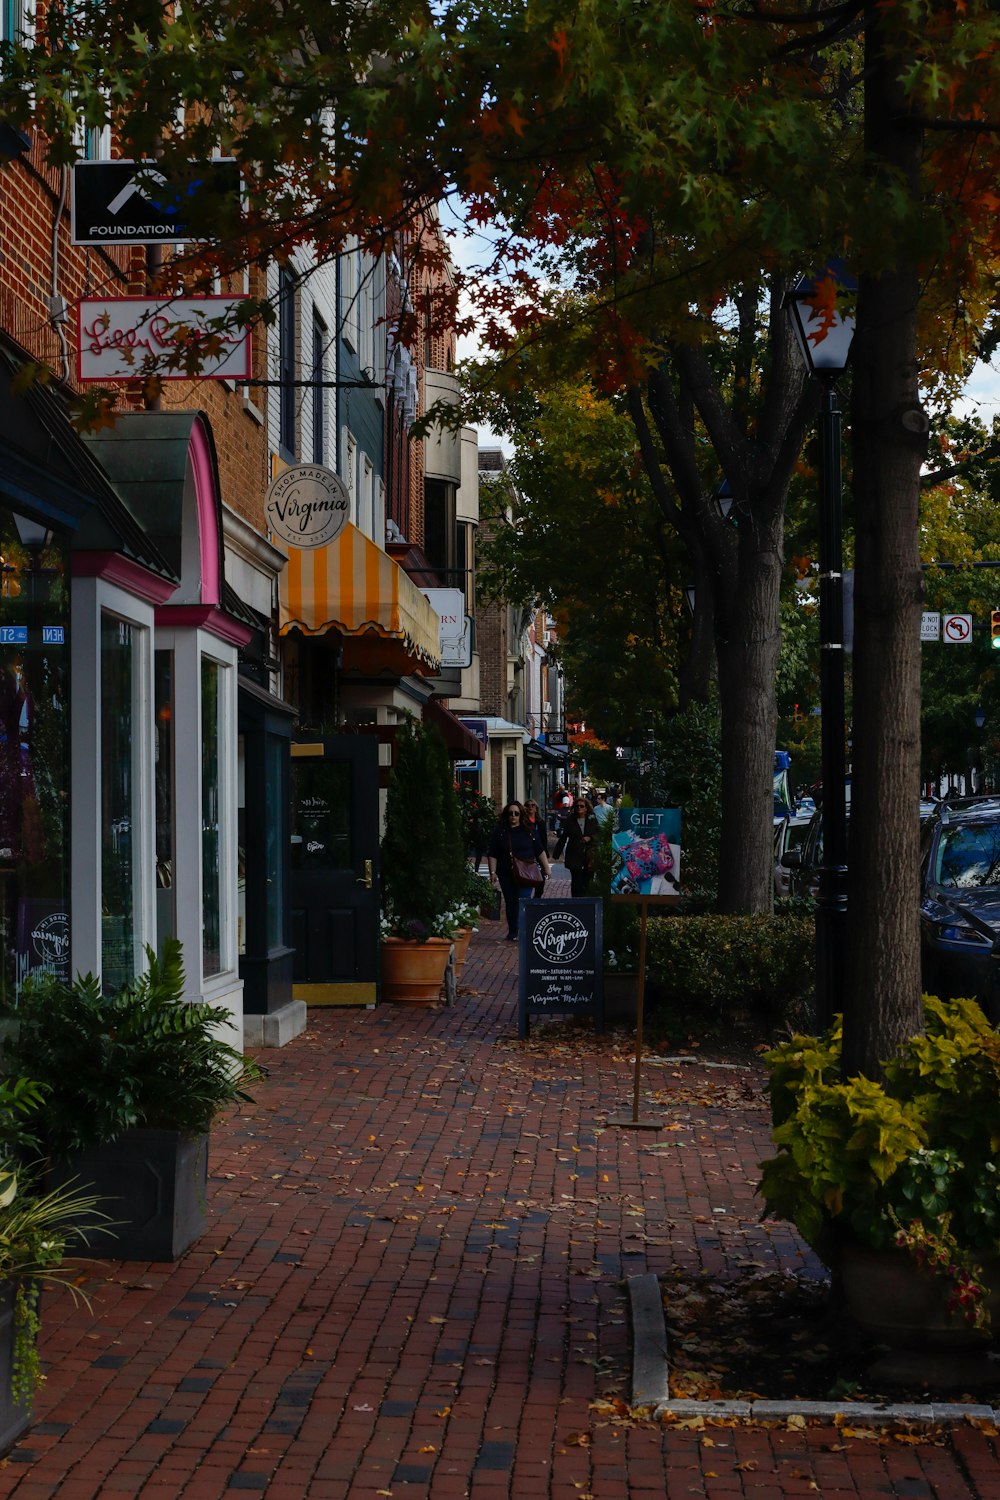 a brick sidewalk with shops and people walking on it